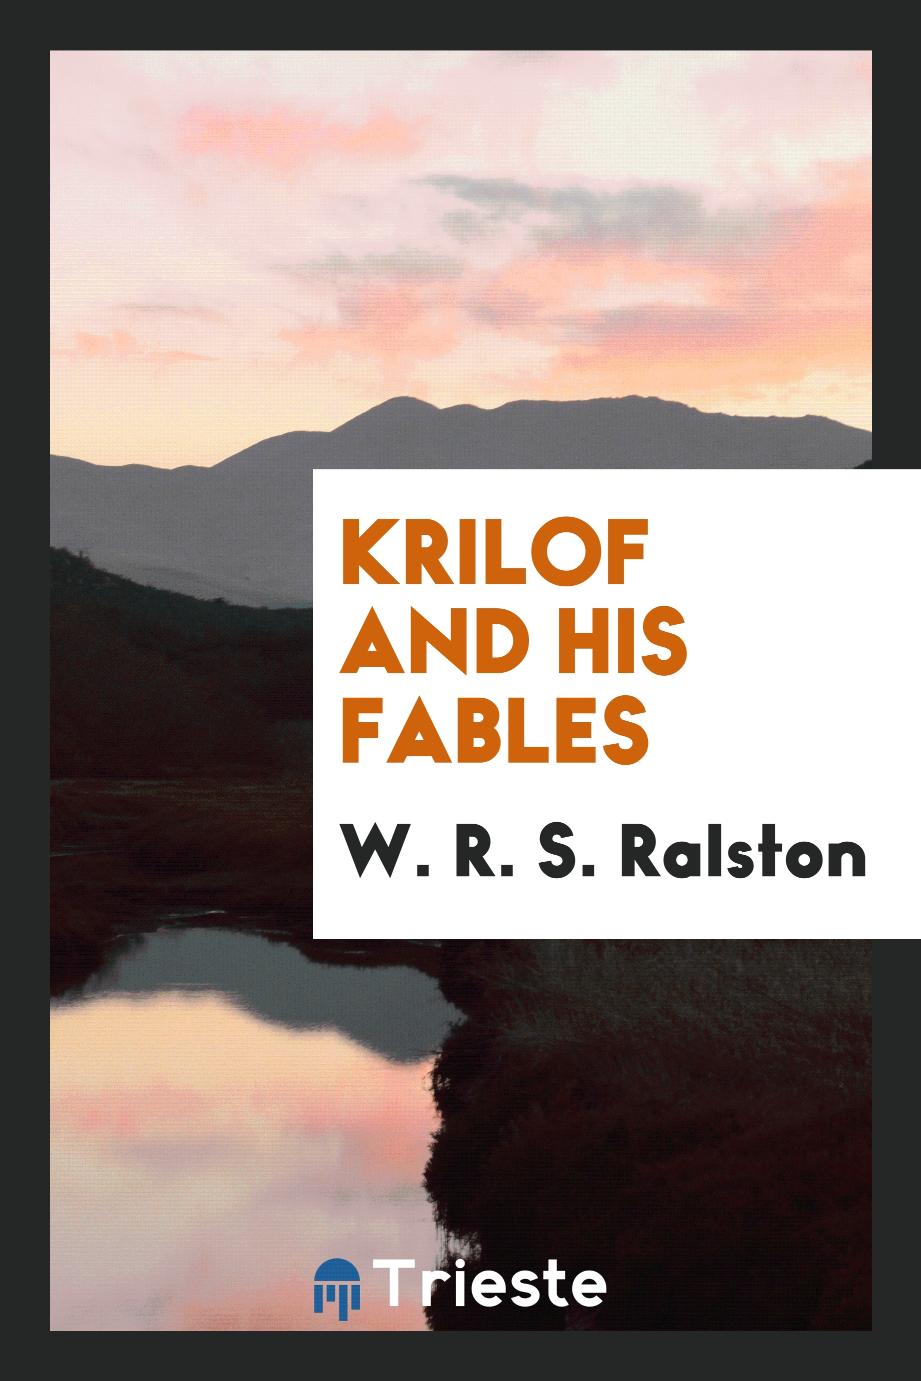 Krilof and His Fables